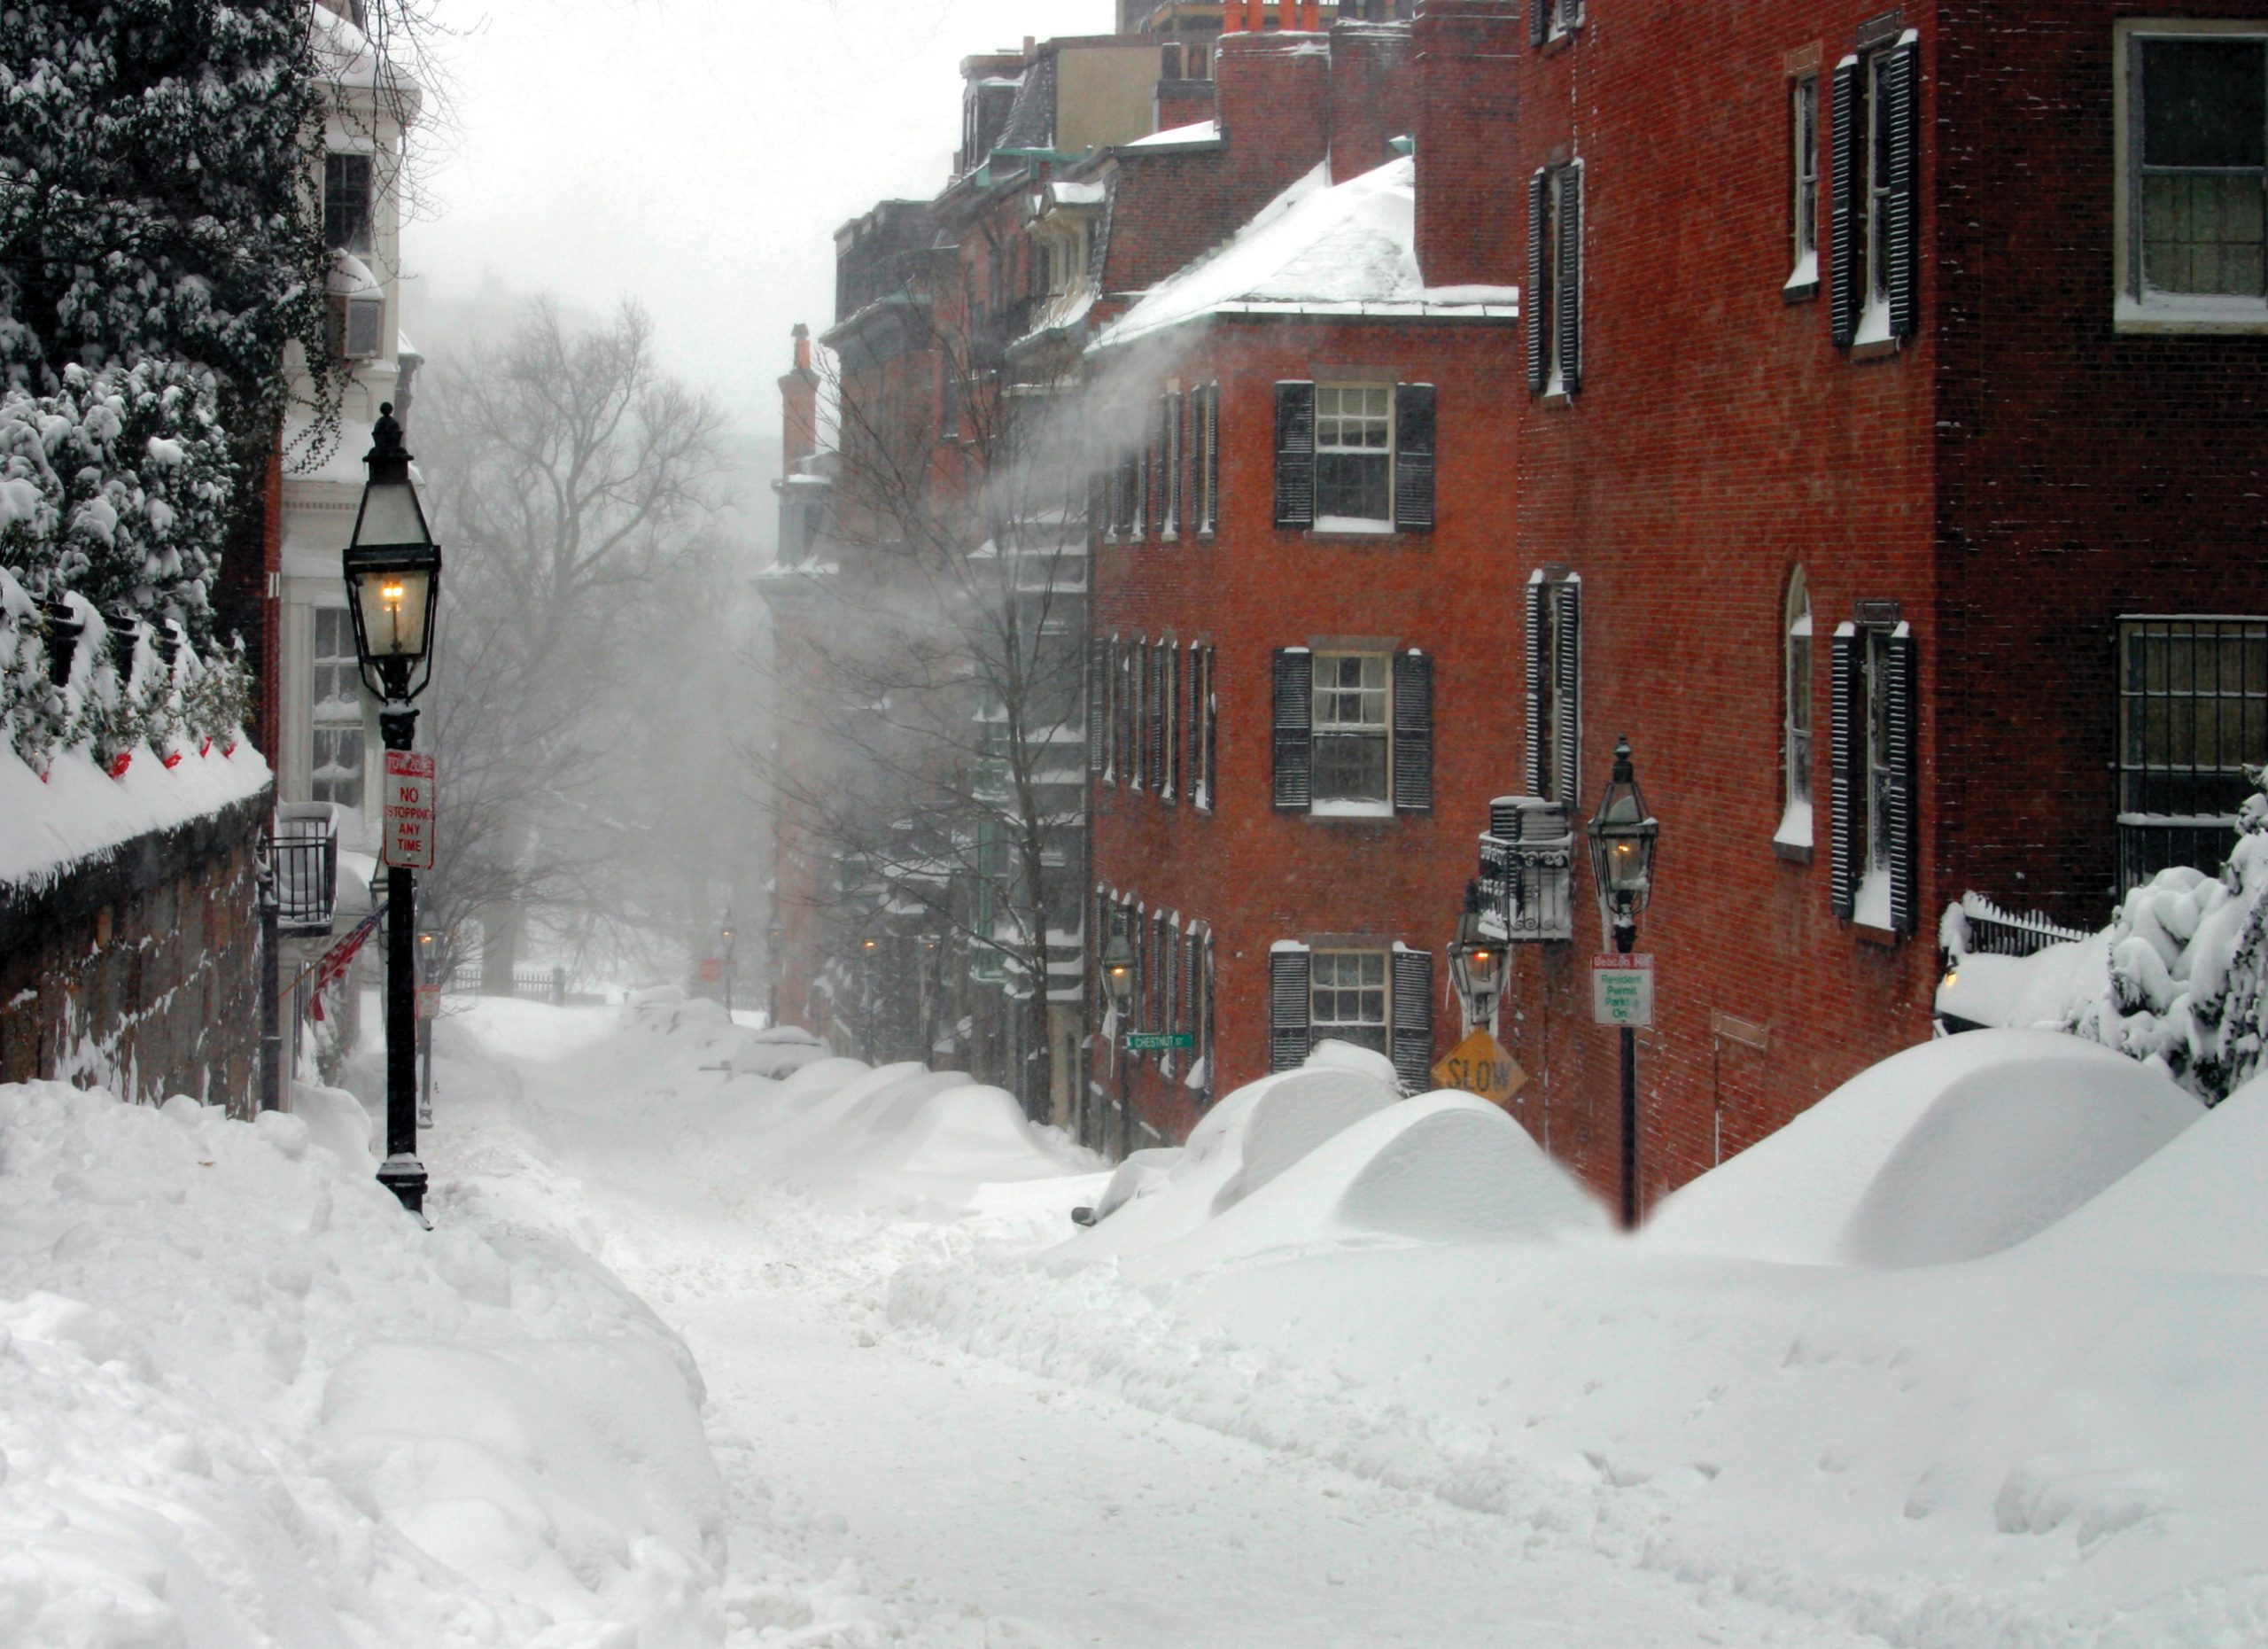 Snow-covered Boston street: Polar vortices are harder to prepare for in warmer areas. Start now.